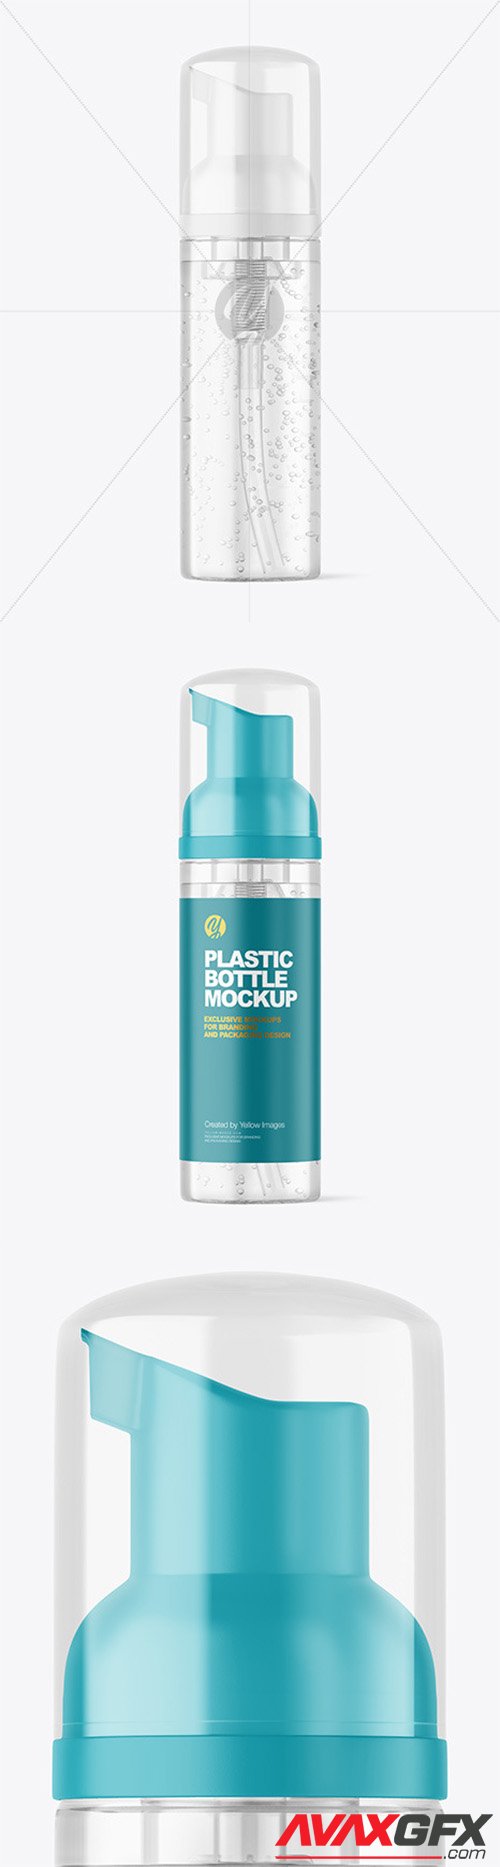 Clear Cosmetic Bottle with Pump Mockup 84767 TIF